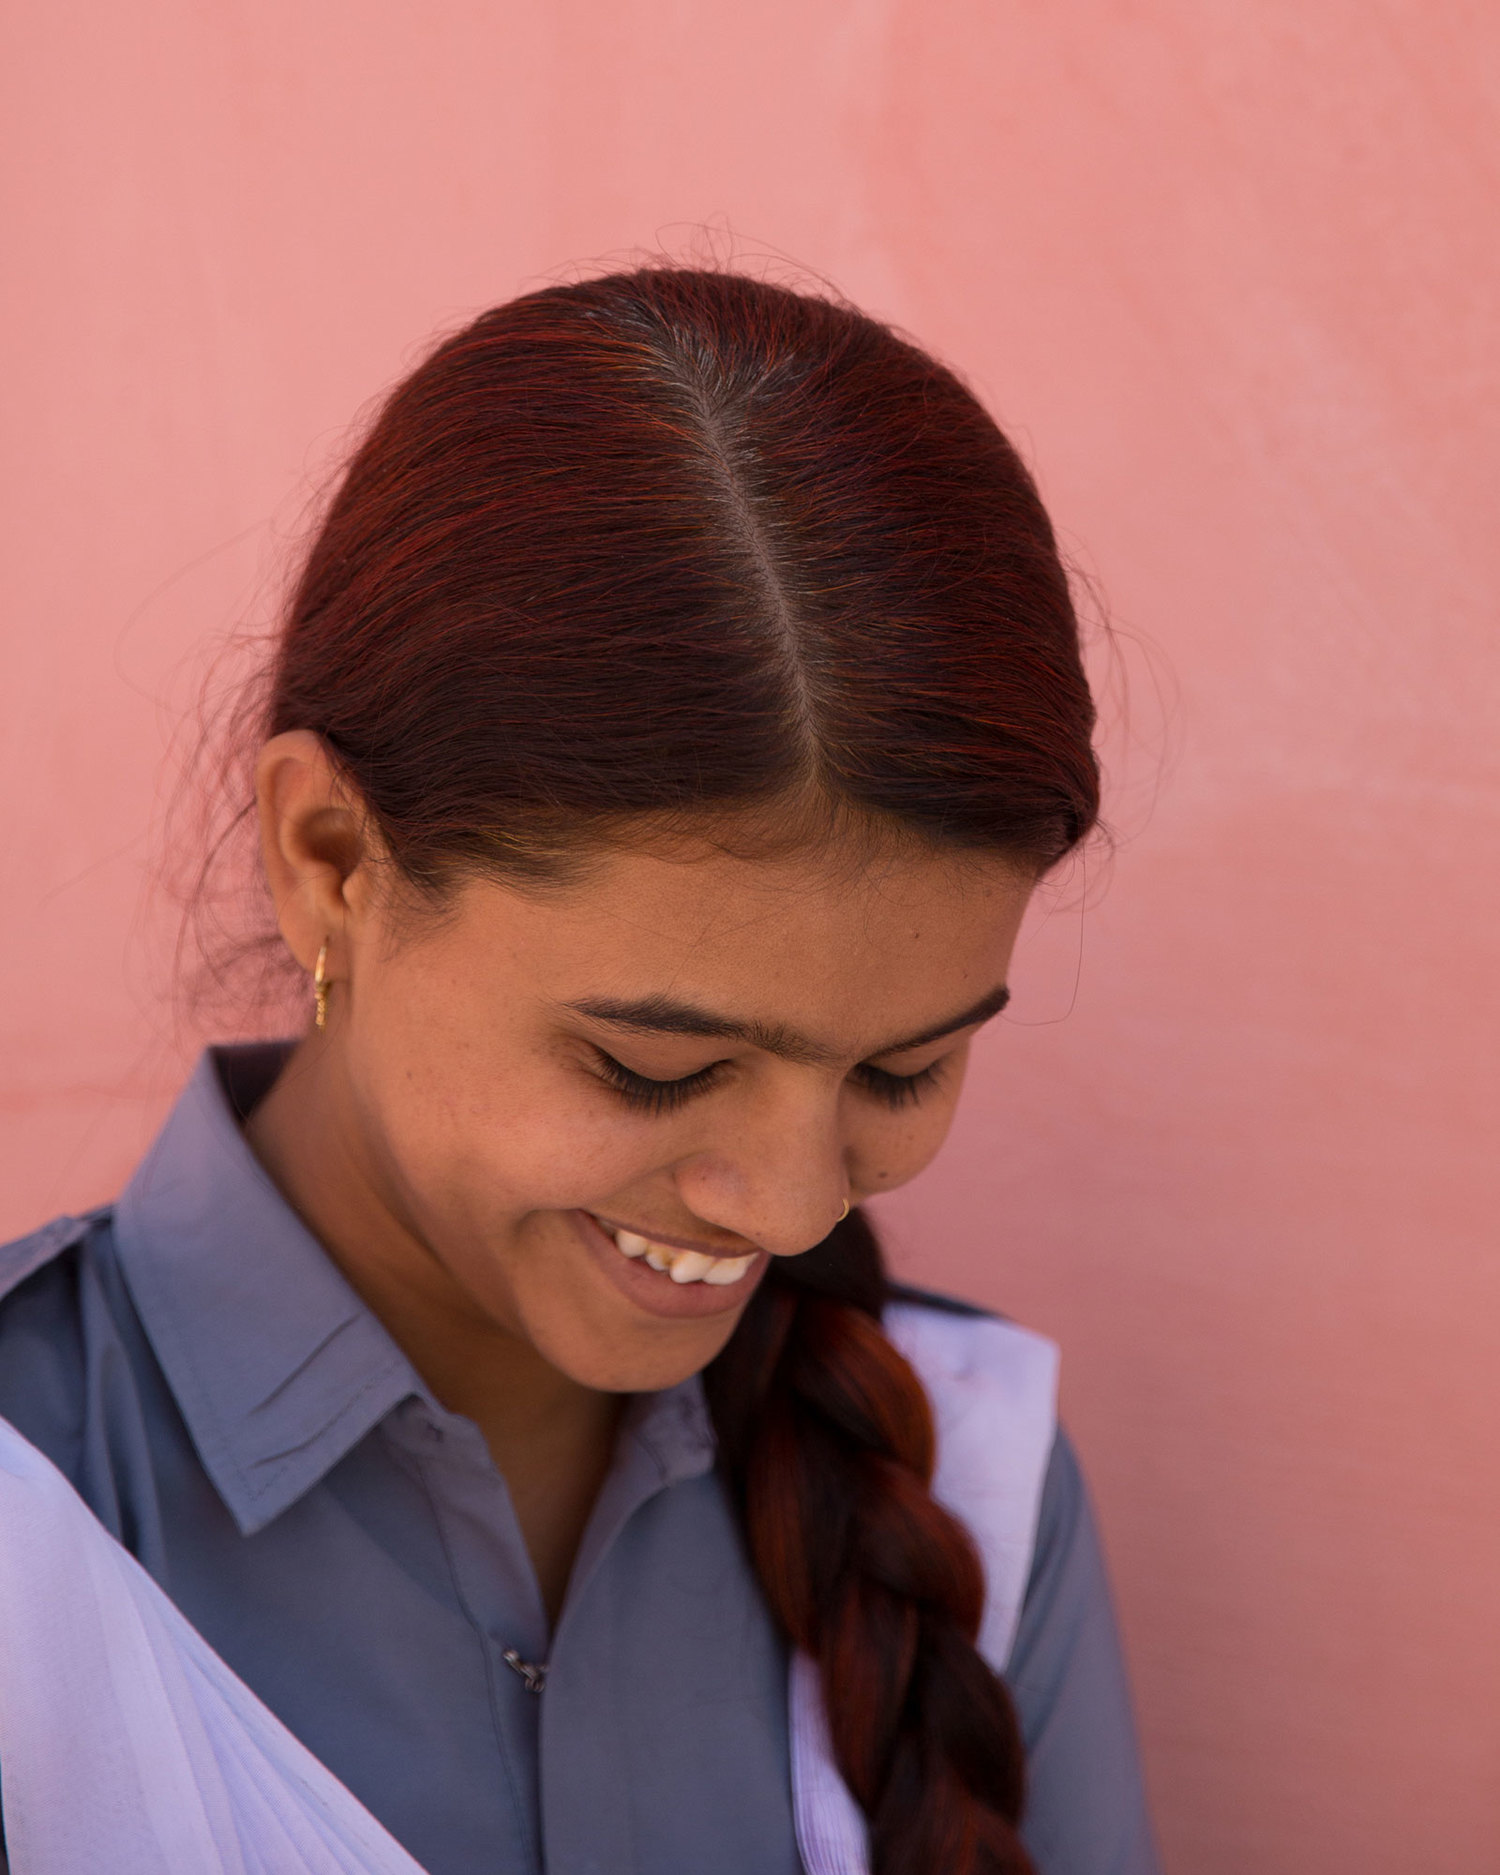   Kachan Chouahan, 9th class.  "I want to be an officer because I want to establish a good society without crime and injustice. I want to work on ending terrorism in the nation." 